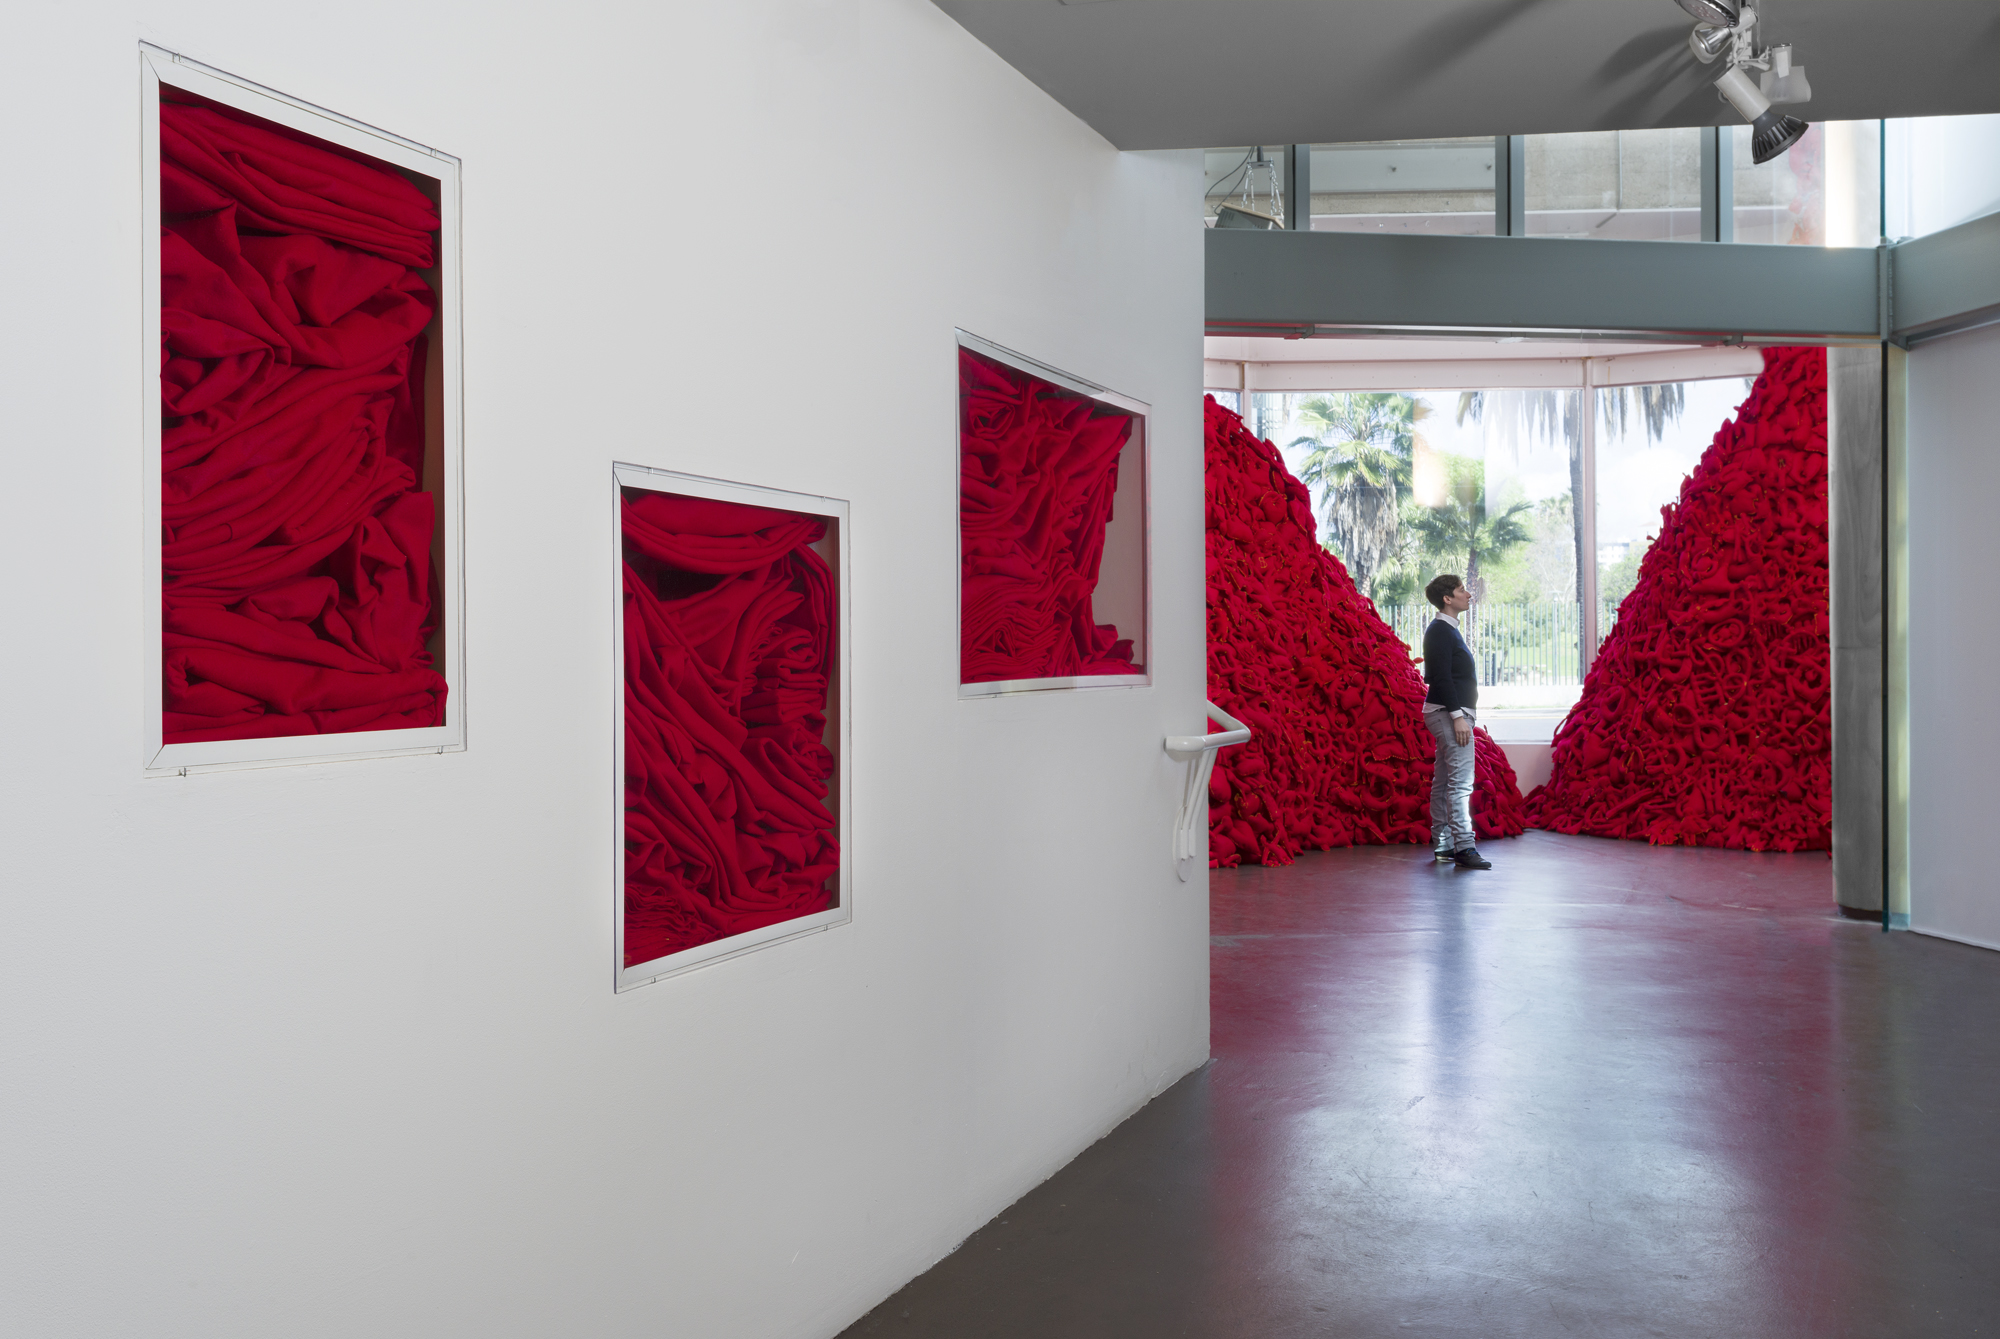  Installation View&nbsp; (Craft &amp; Folk Art Museum, 2015)   The Pile,&nbsp; 2014 Single Channel HD Video Projection with Sound (16mm Film), TRT 12:00, Looping; Digital C-Prints; Hand-Stitched Red Felt Objects Installation Dimensions Variable 